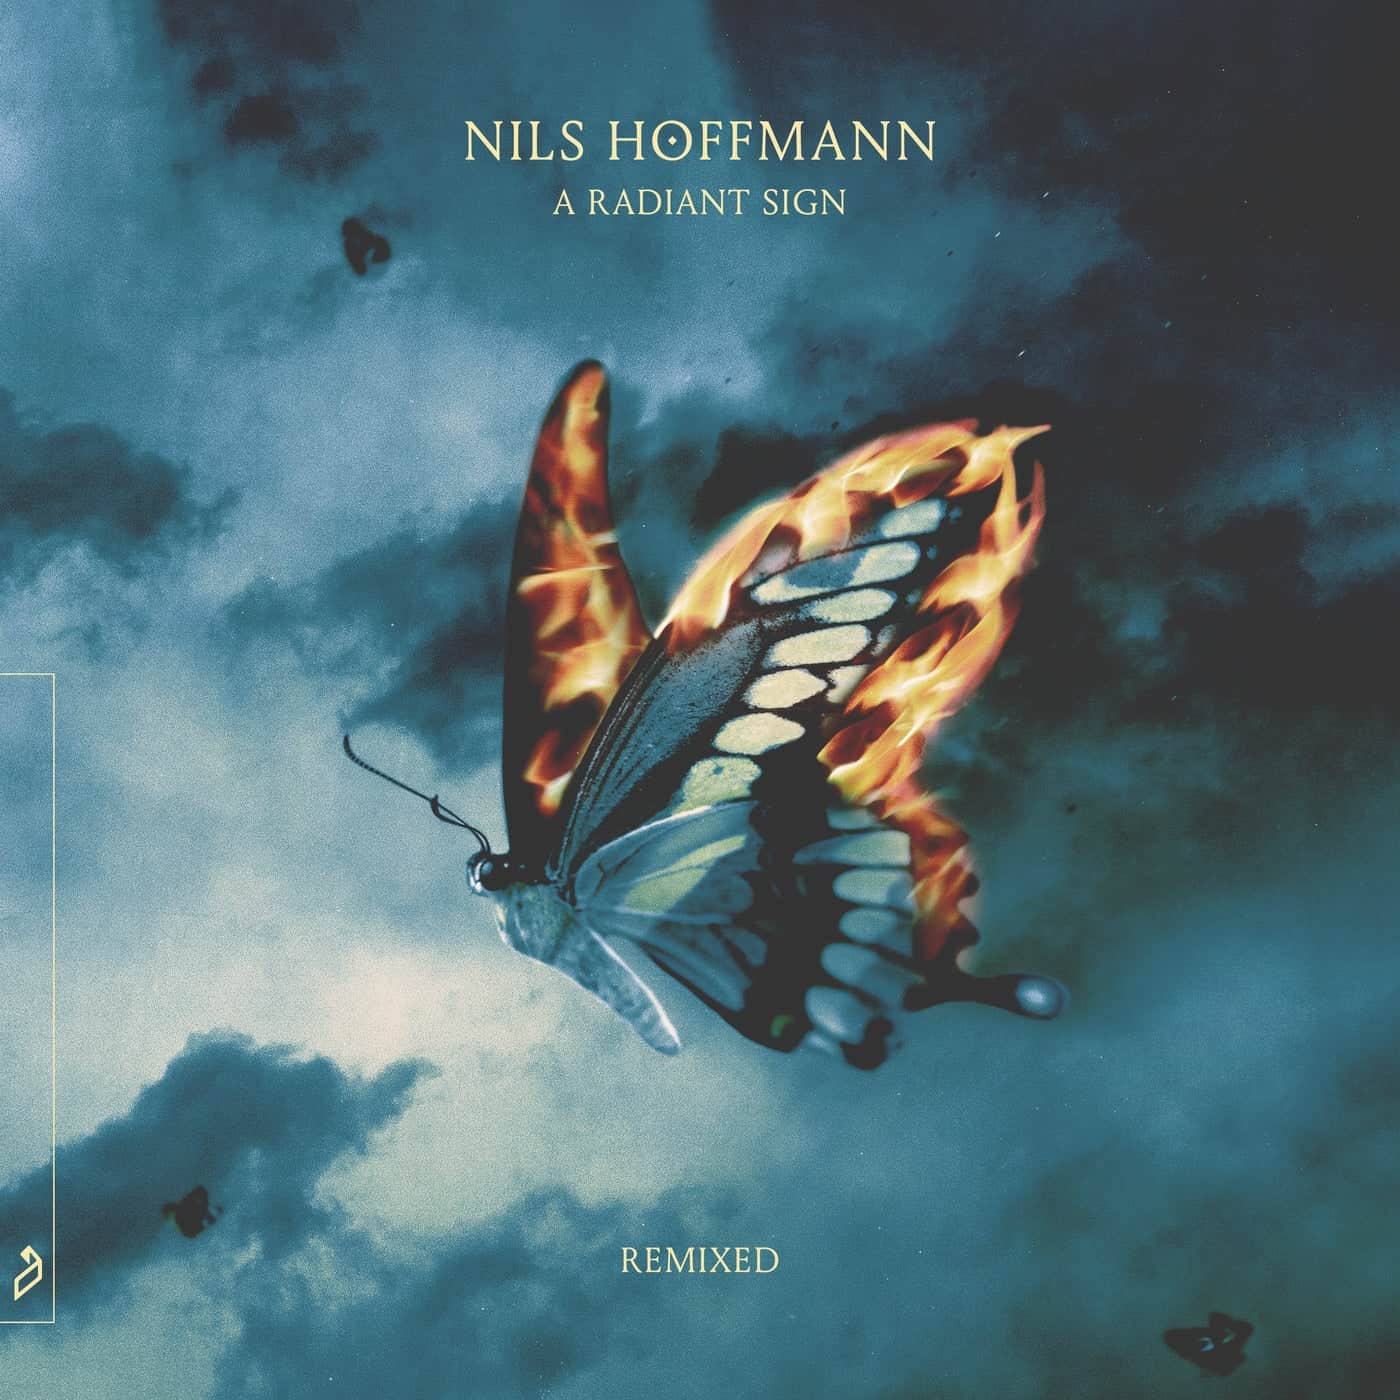 Download Panama, Nils Hoffmann, Julia Church, Tender - A Radiant Sign (Remixed) on Electrobuzz